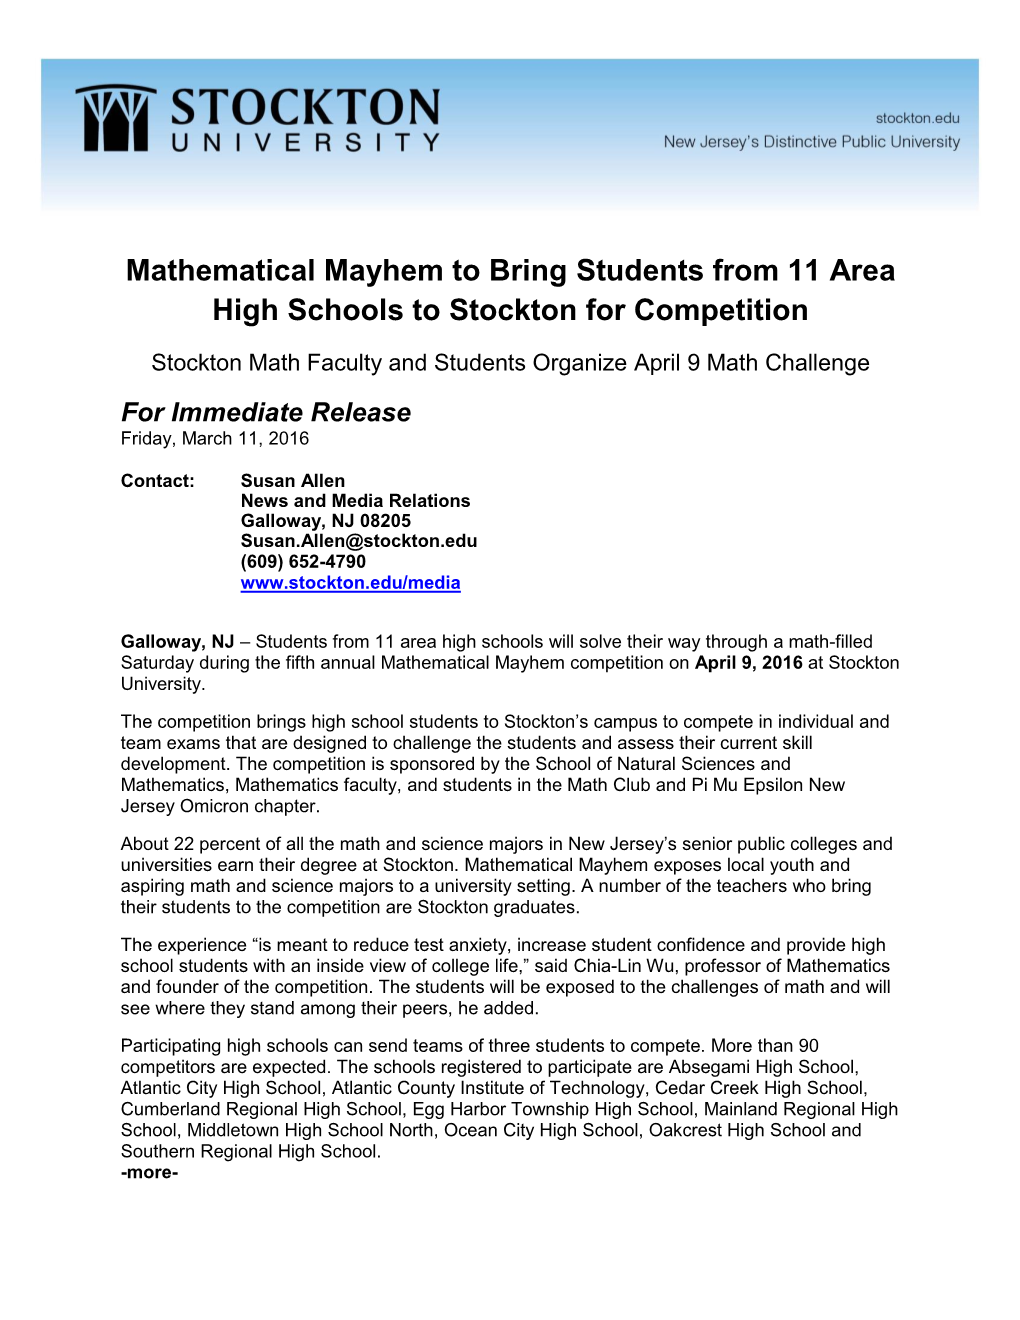 Mathematical Mayhem to Bring Students from 11 Area High Schools to Stockton for Competition